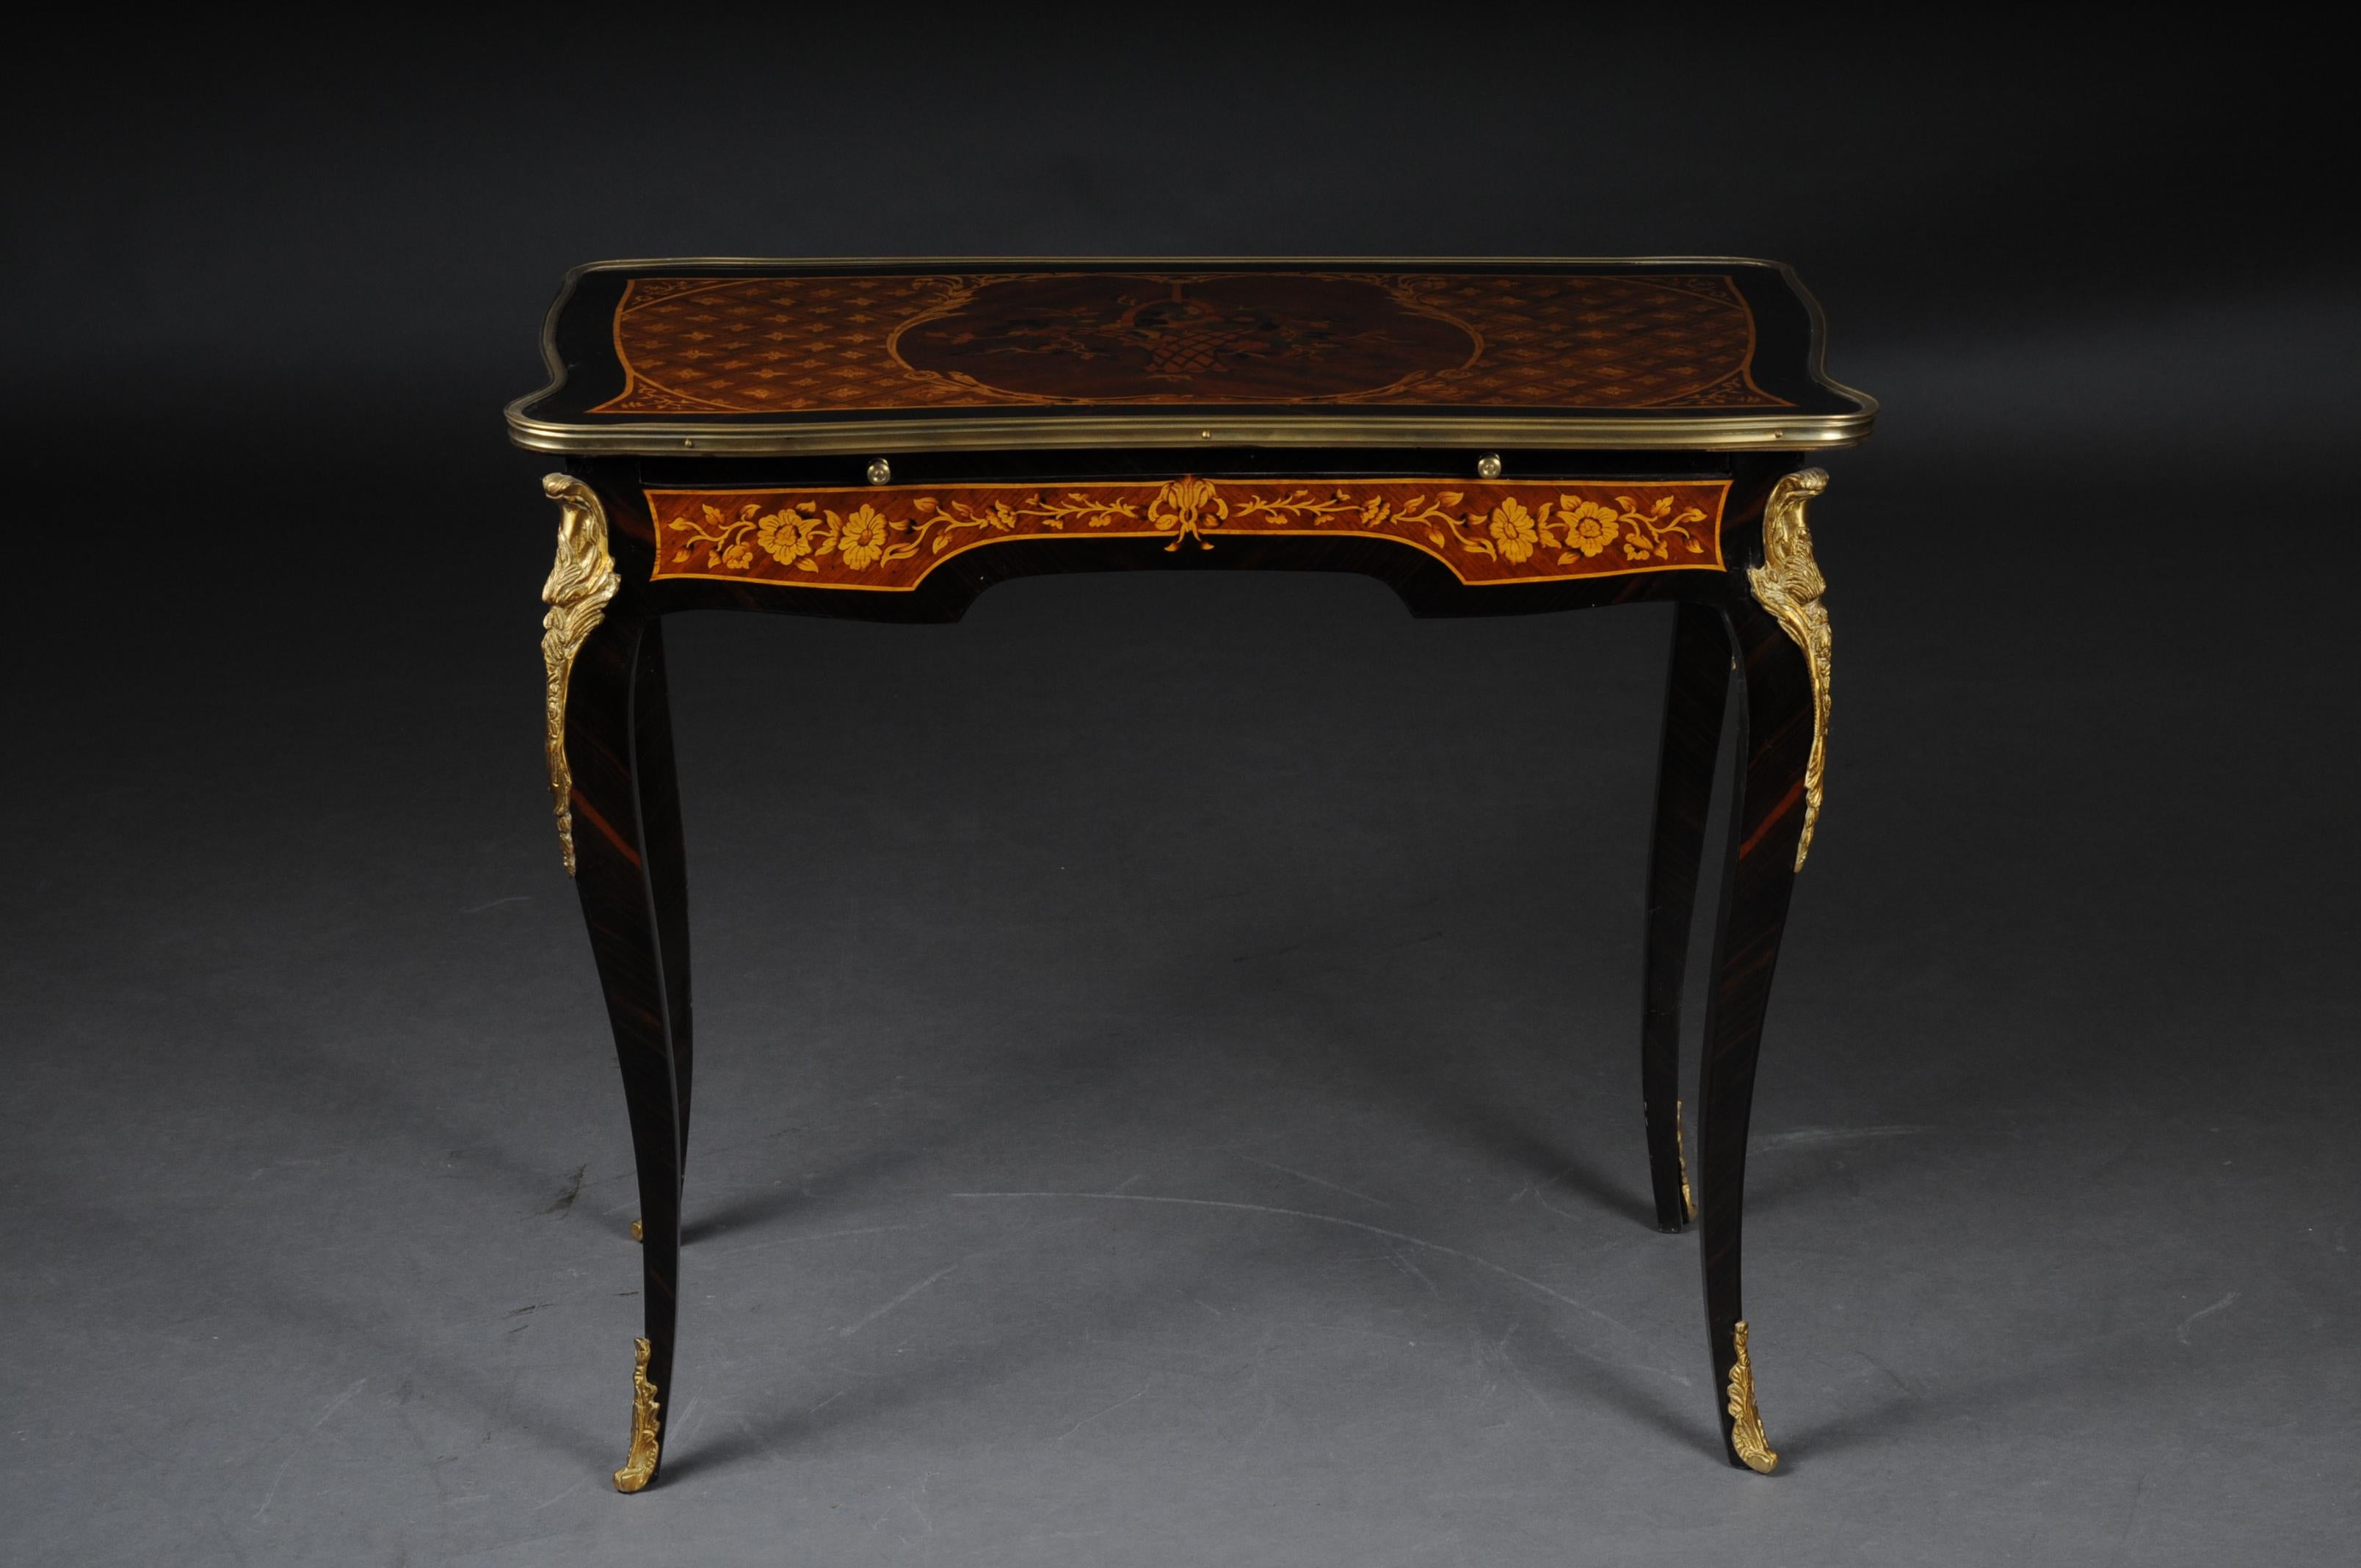 Ladies desk or table in Louis Quinze style.
 
Inlays on solid softwood. Ending high, curved square legs in sabots. Slightly overhanging, framed in wide, matching profiles, tabletop with inset filigree maple inlays. Full-surface mirrored veneer on